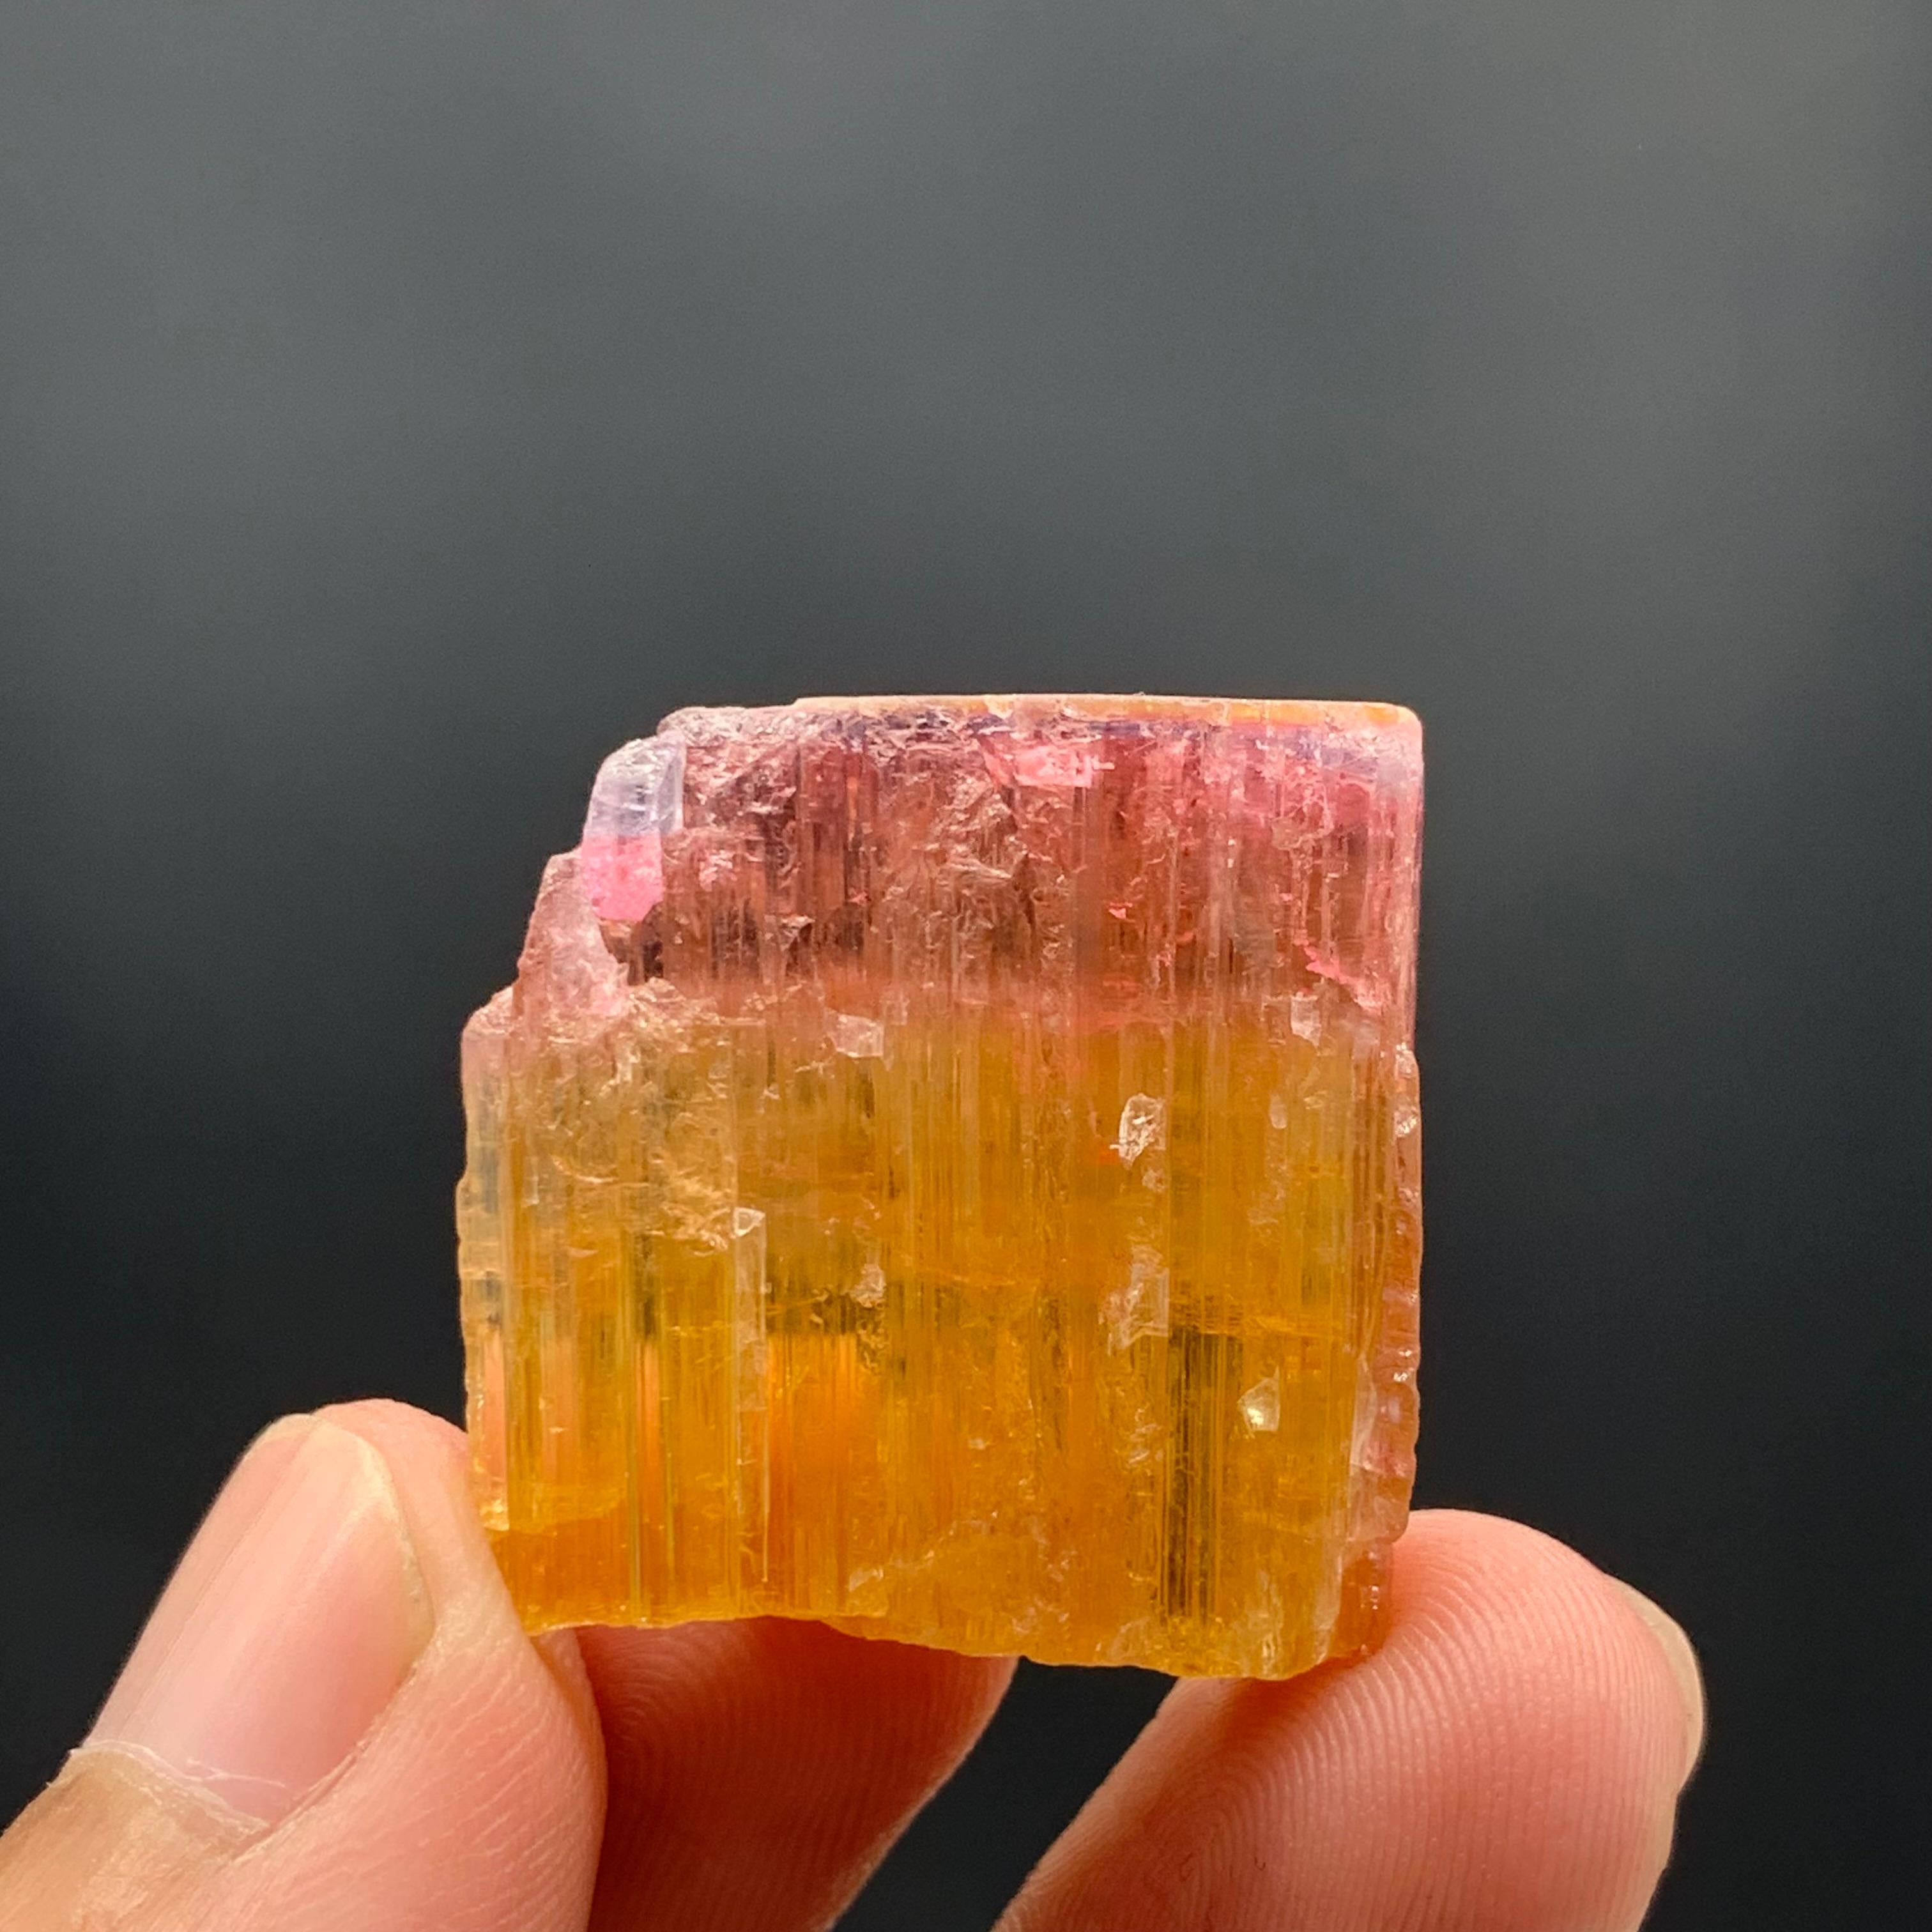 18th Century and Earlier 59.15 Carat Beautiful Bi Color Tourmaline Crystal From Paprook Mine, Afghanistan For Sale